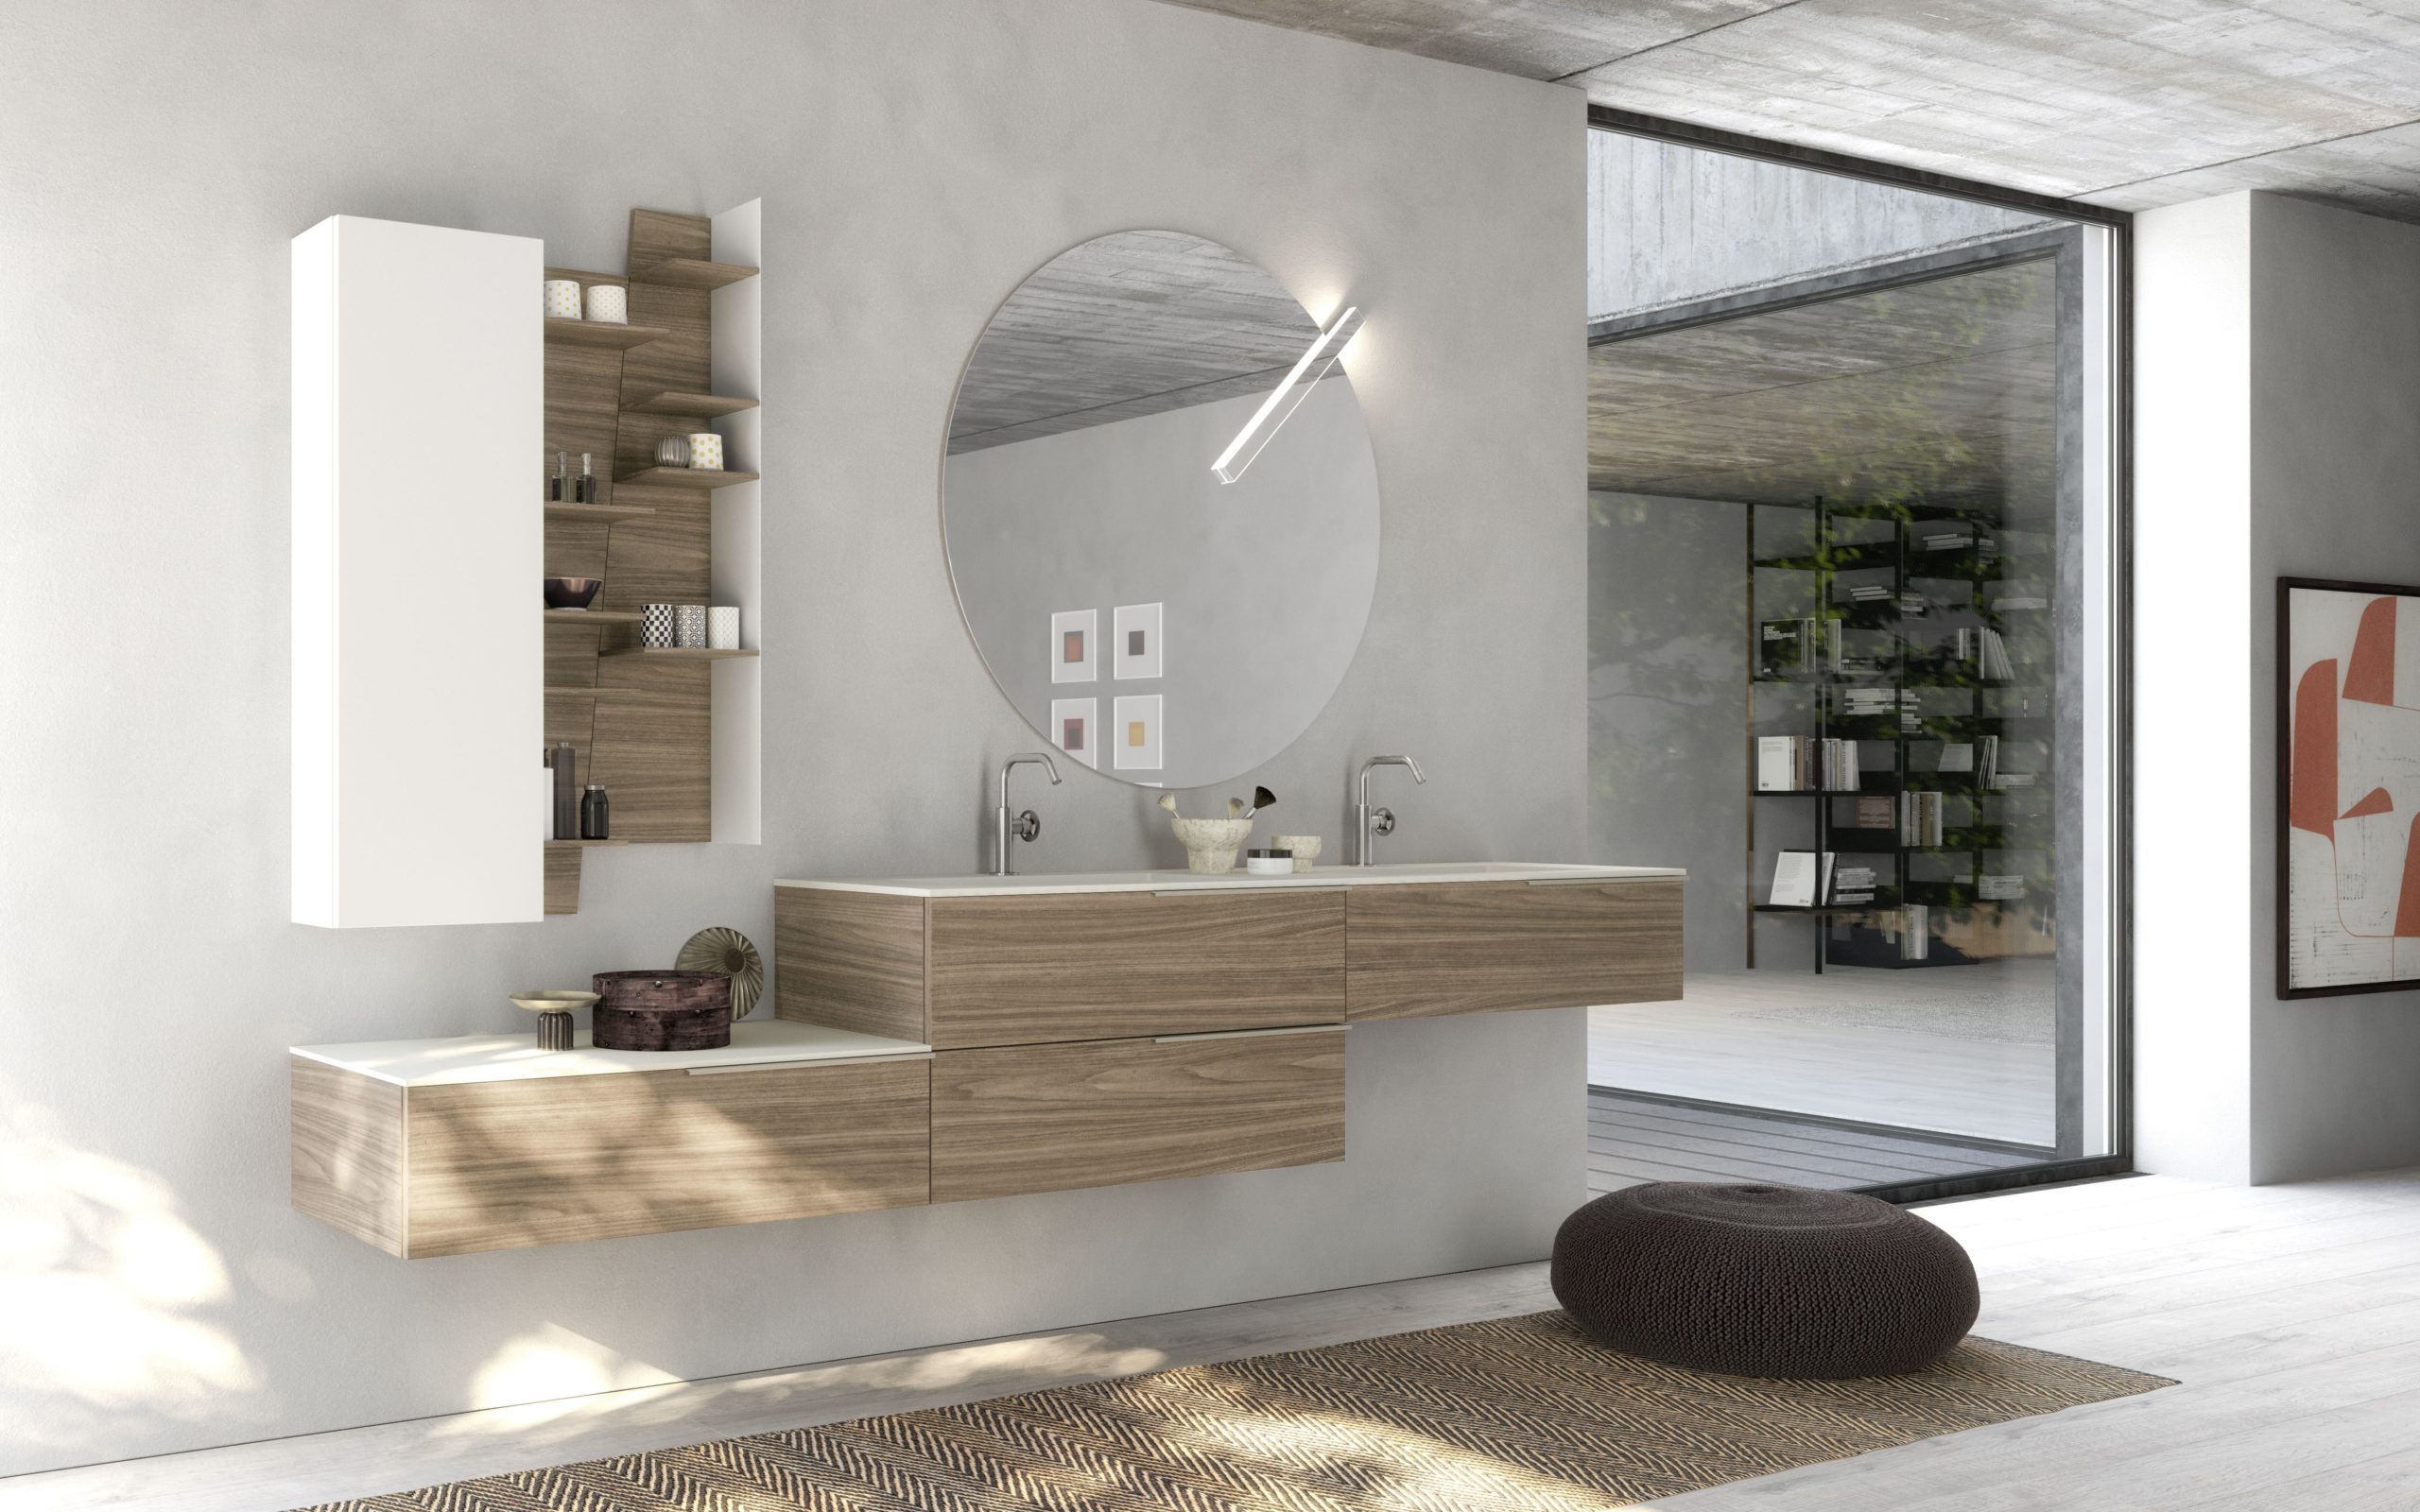 A staggered, wall-mounted vanity in a luxury bathroom